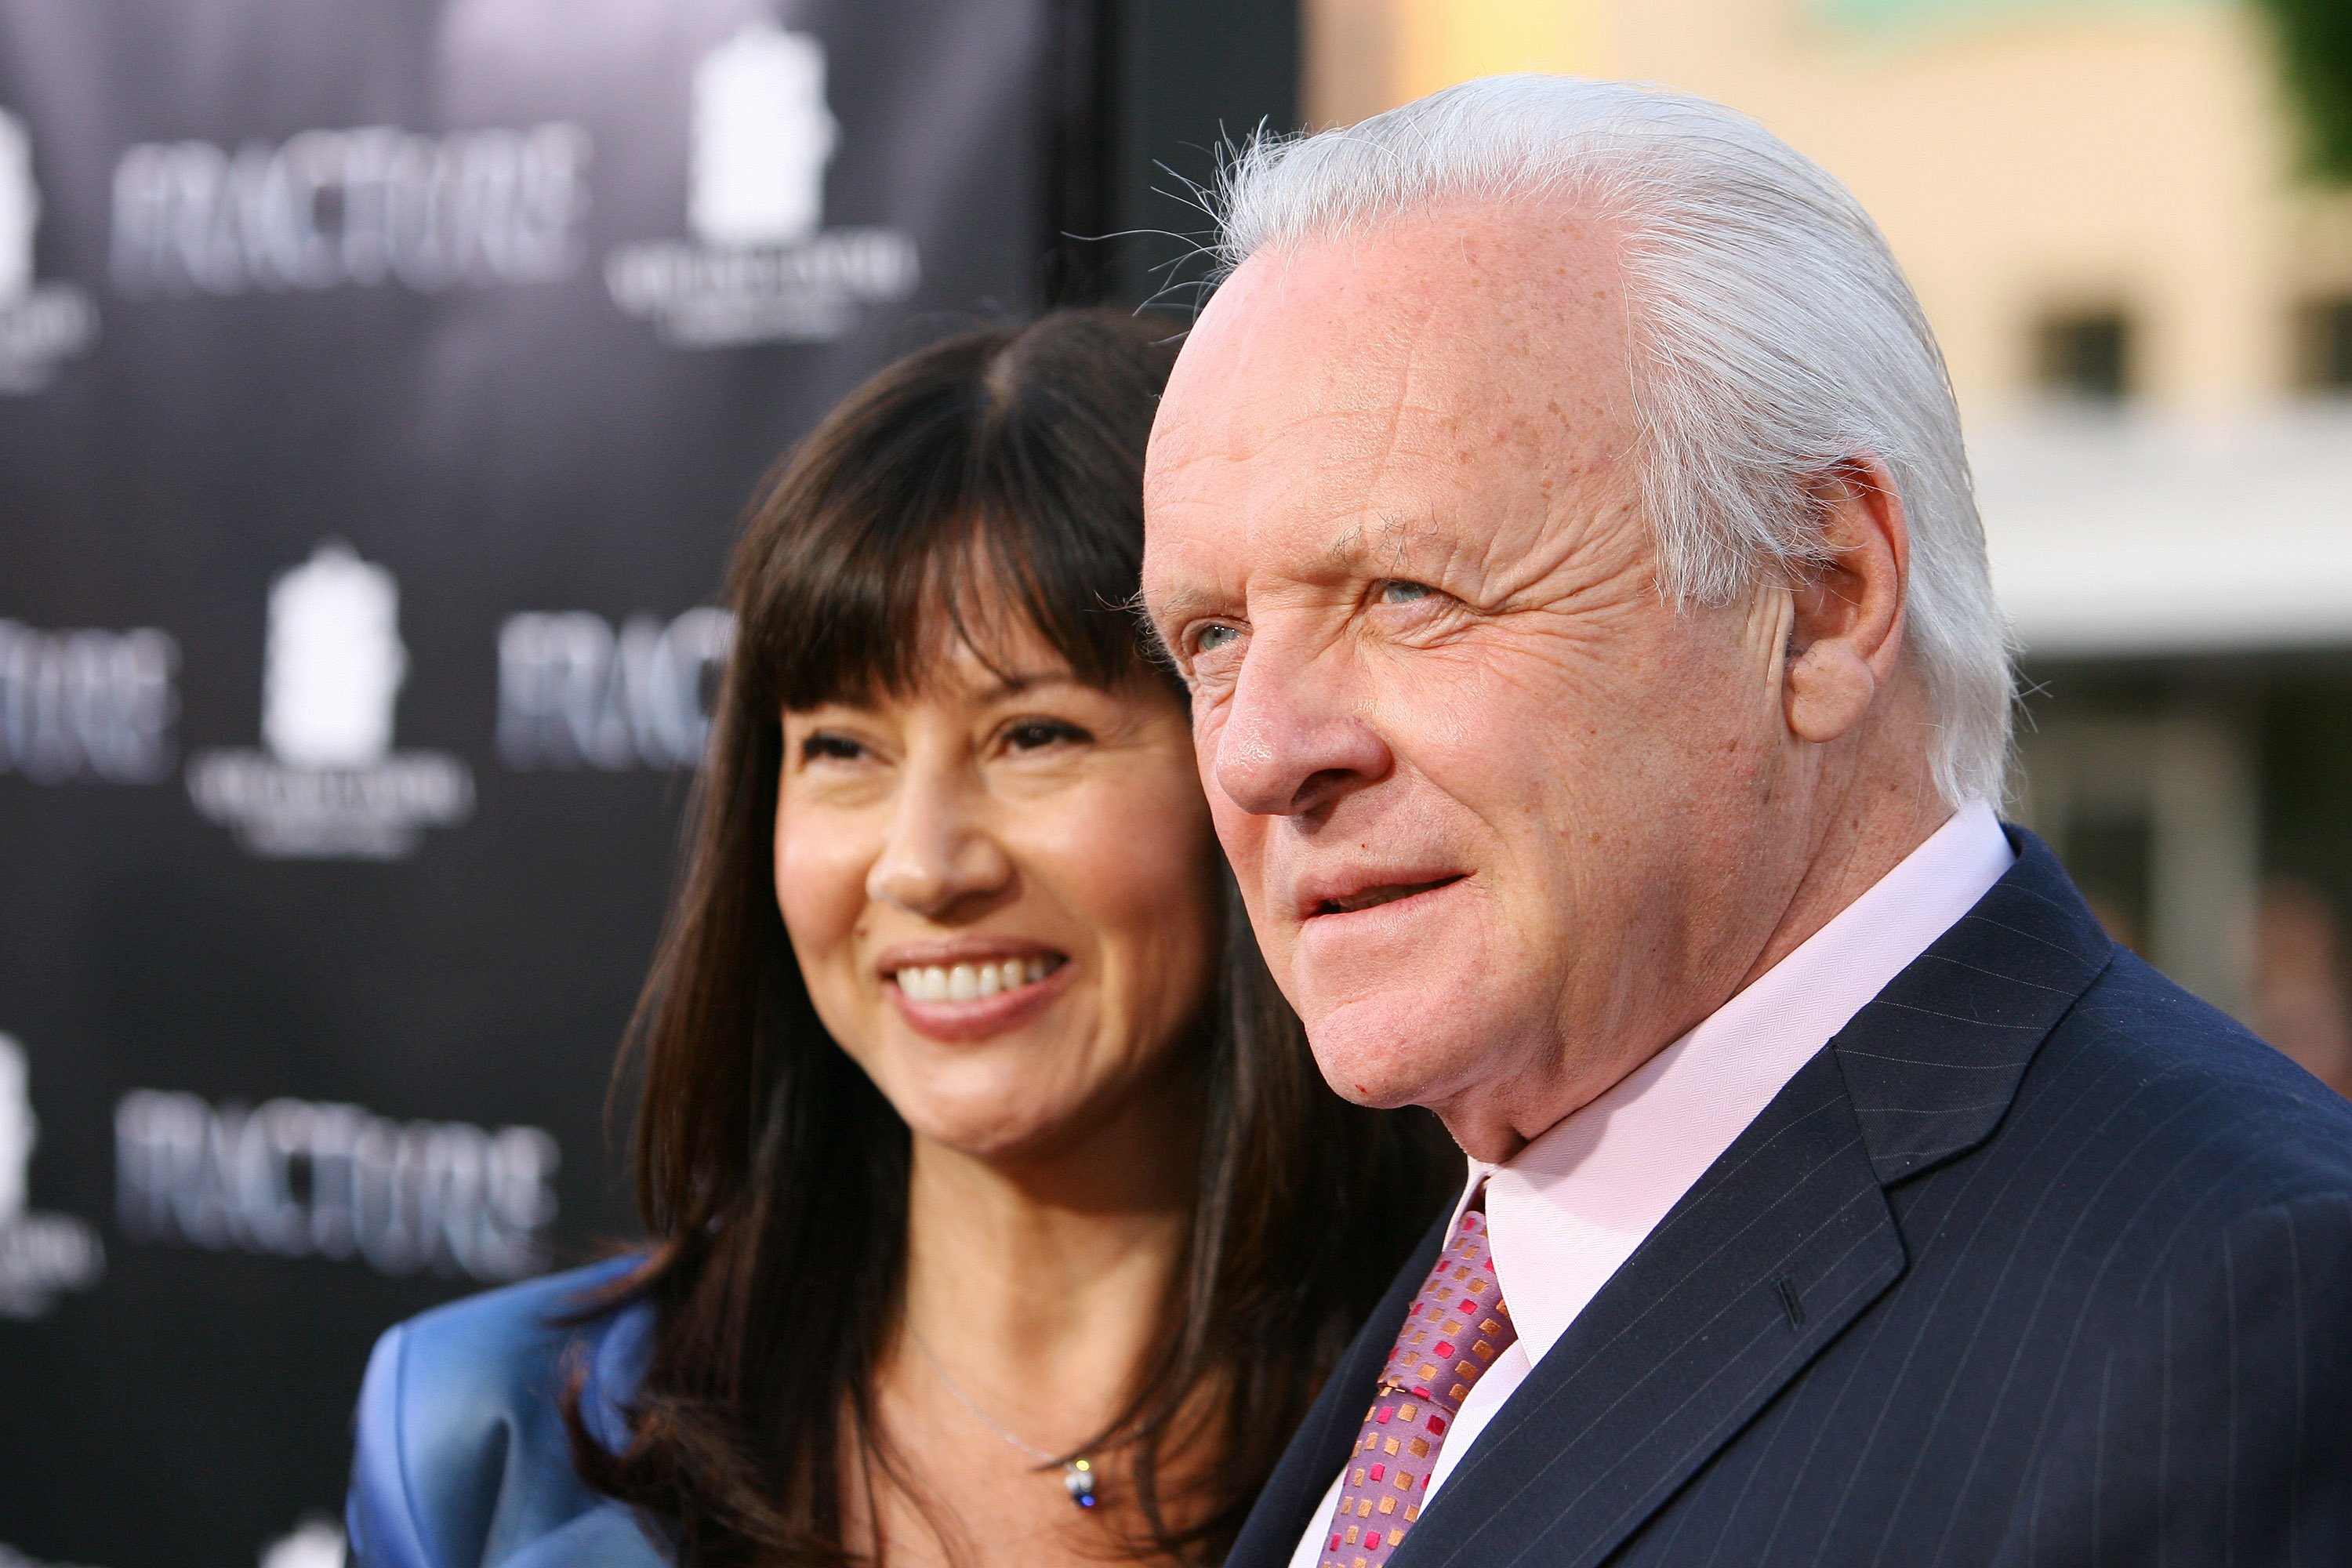 Stella Arroyave and Anthony Hopkins attend the premiere of "Fracture" on April 11, 2007, in Westwood, California. | Source: Getty Images